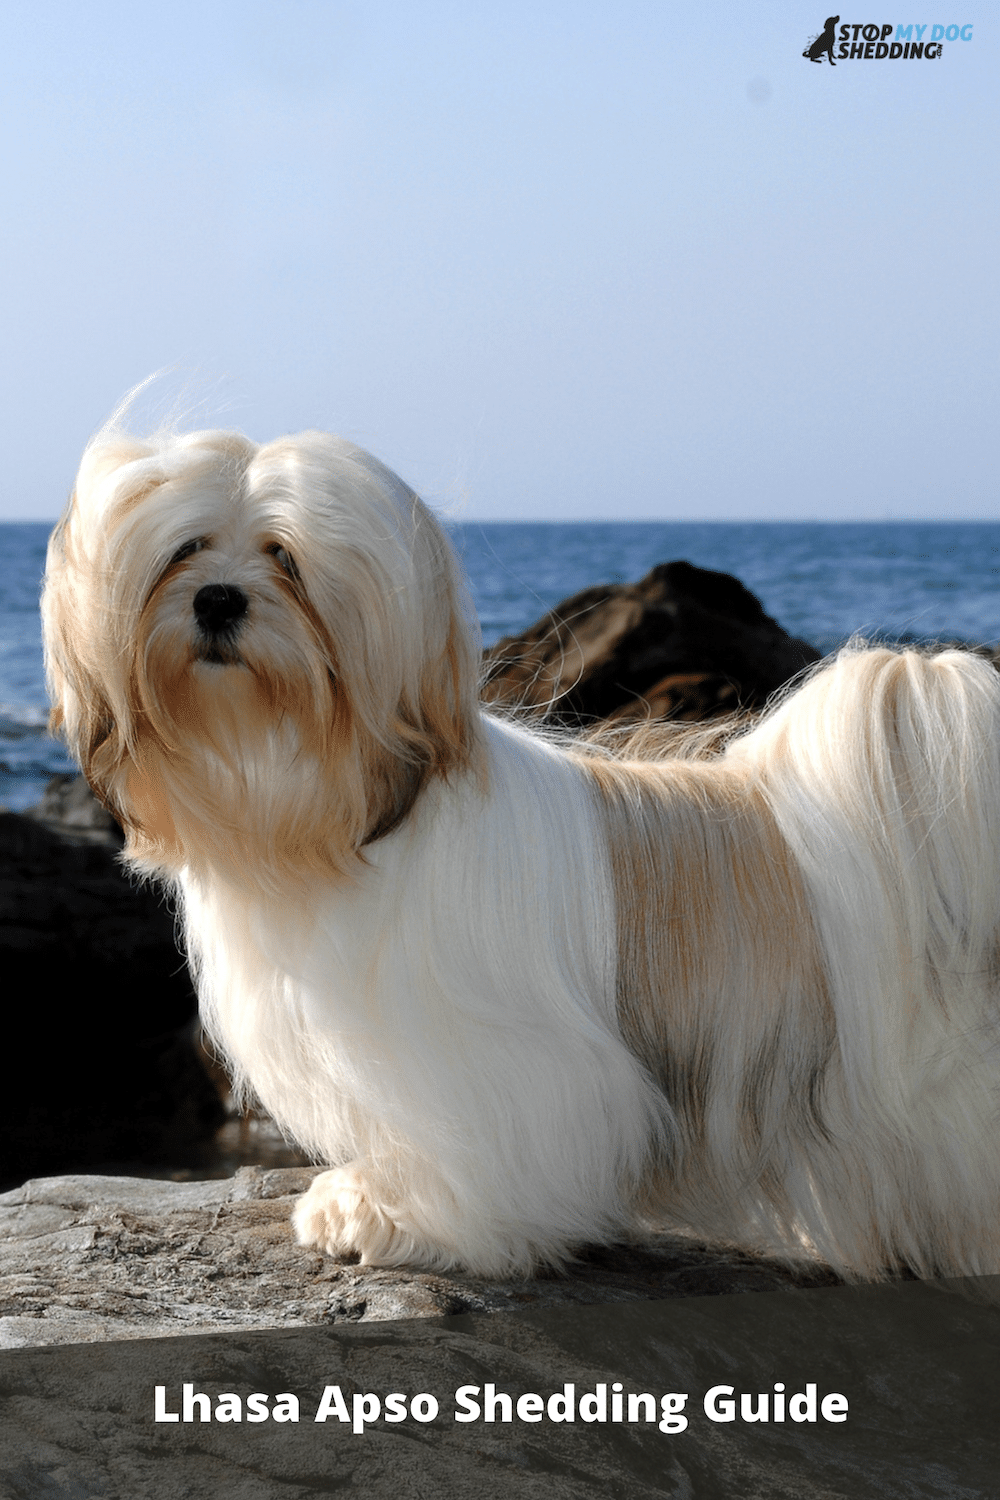 Do Lhasa Apso Dogs Shed? (Shedding and Grooming Guide)